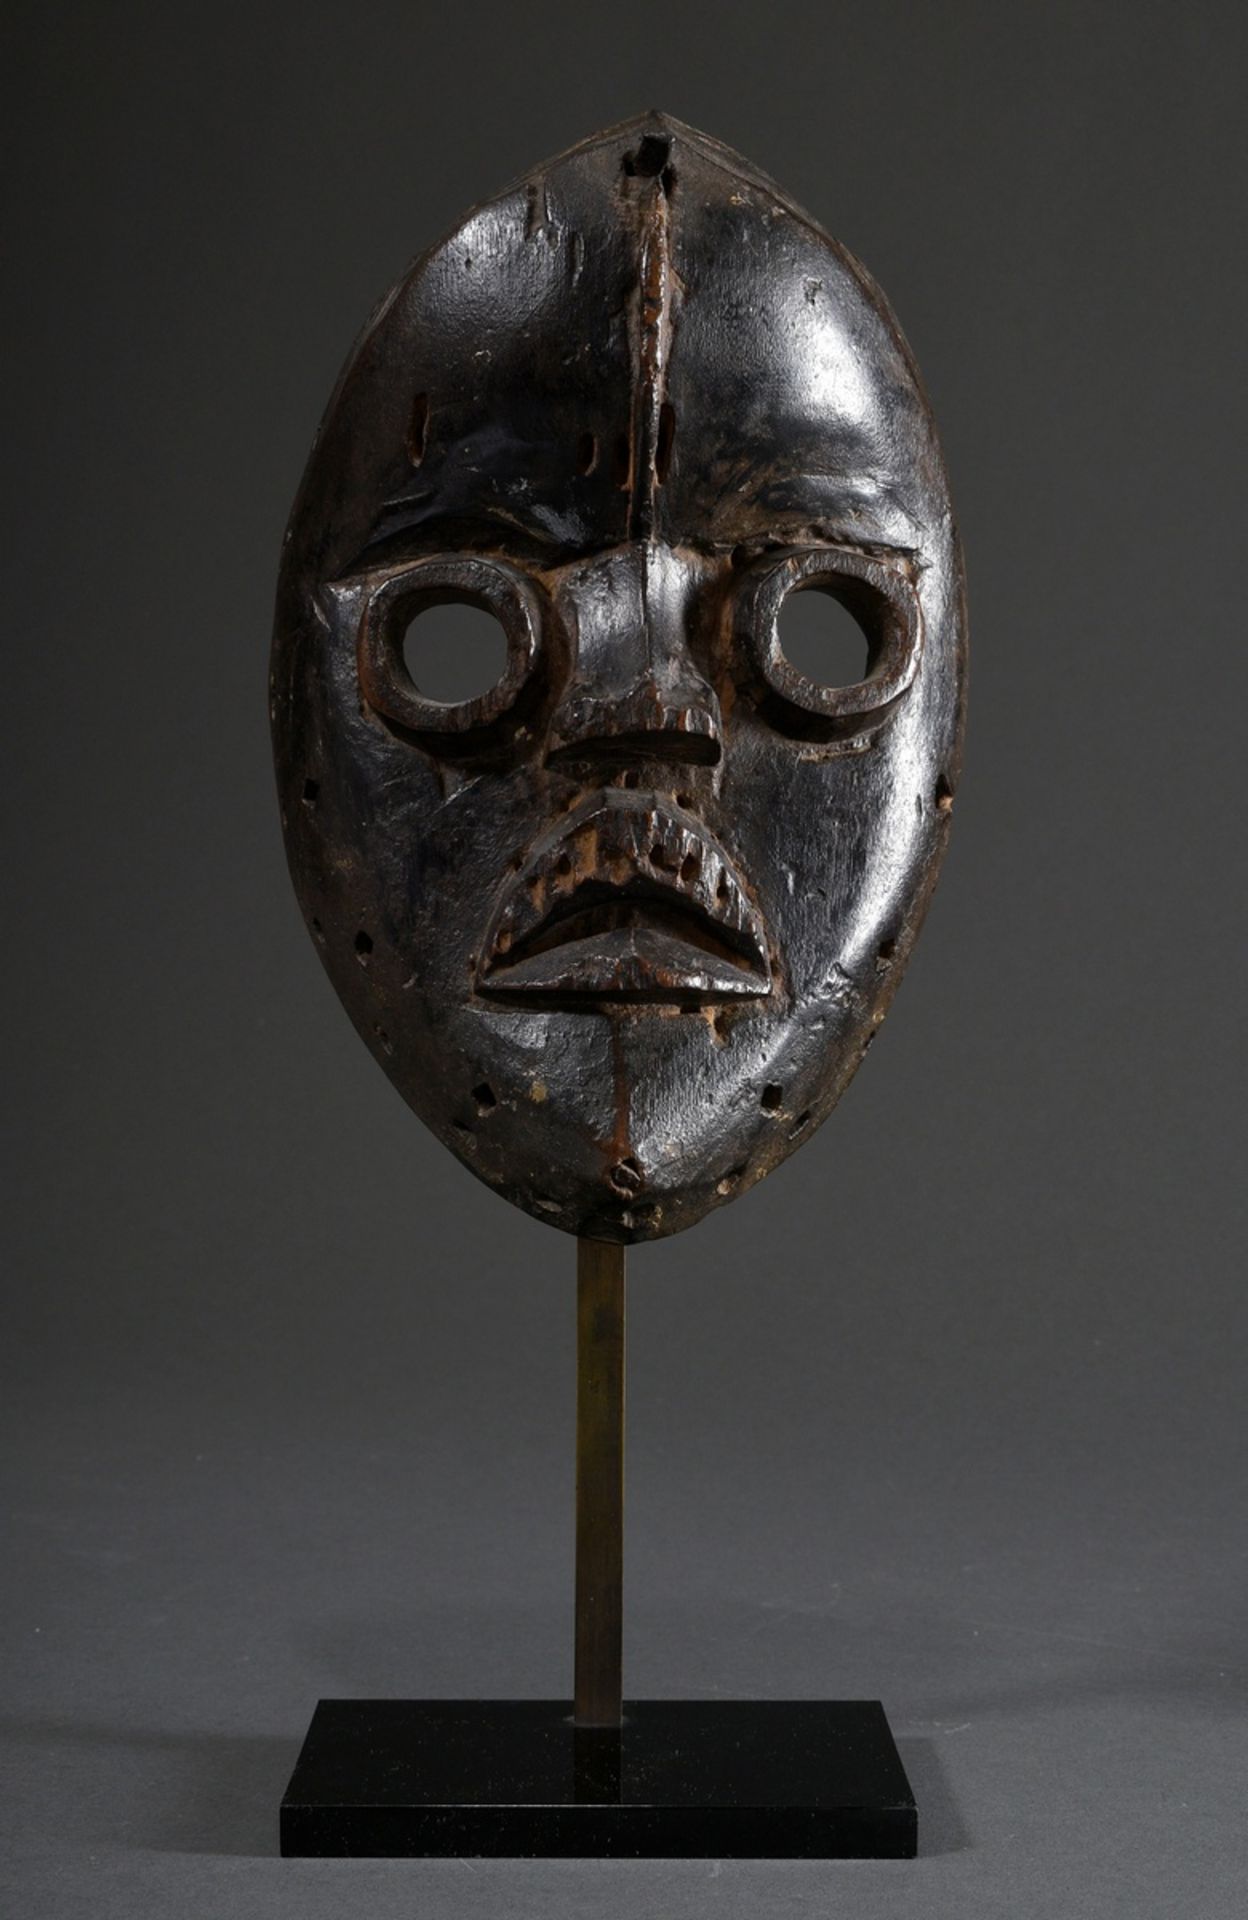 Dan mask with round eyes and iron nail above vertical forehead bulge, carved wood and dark patina, 